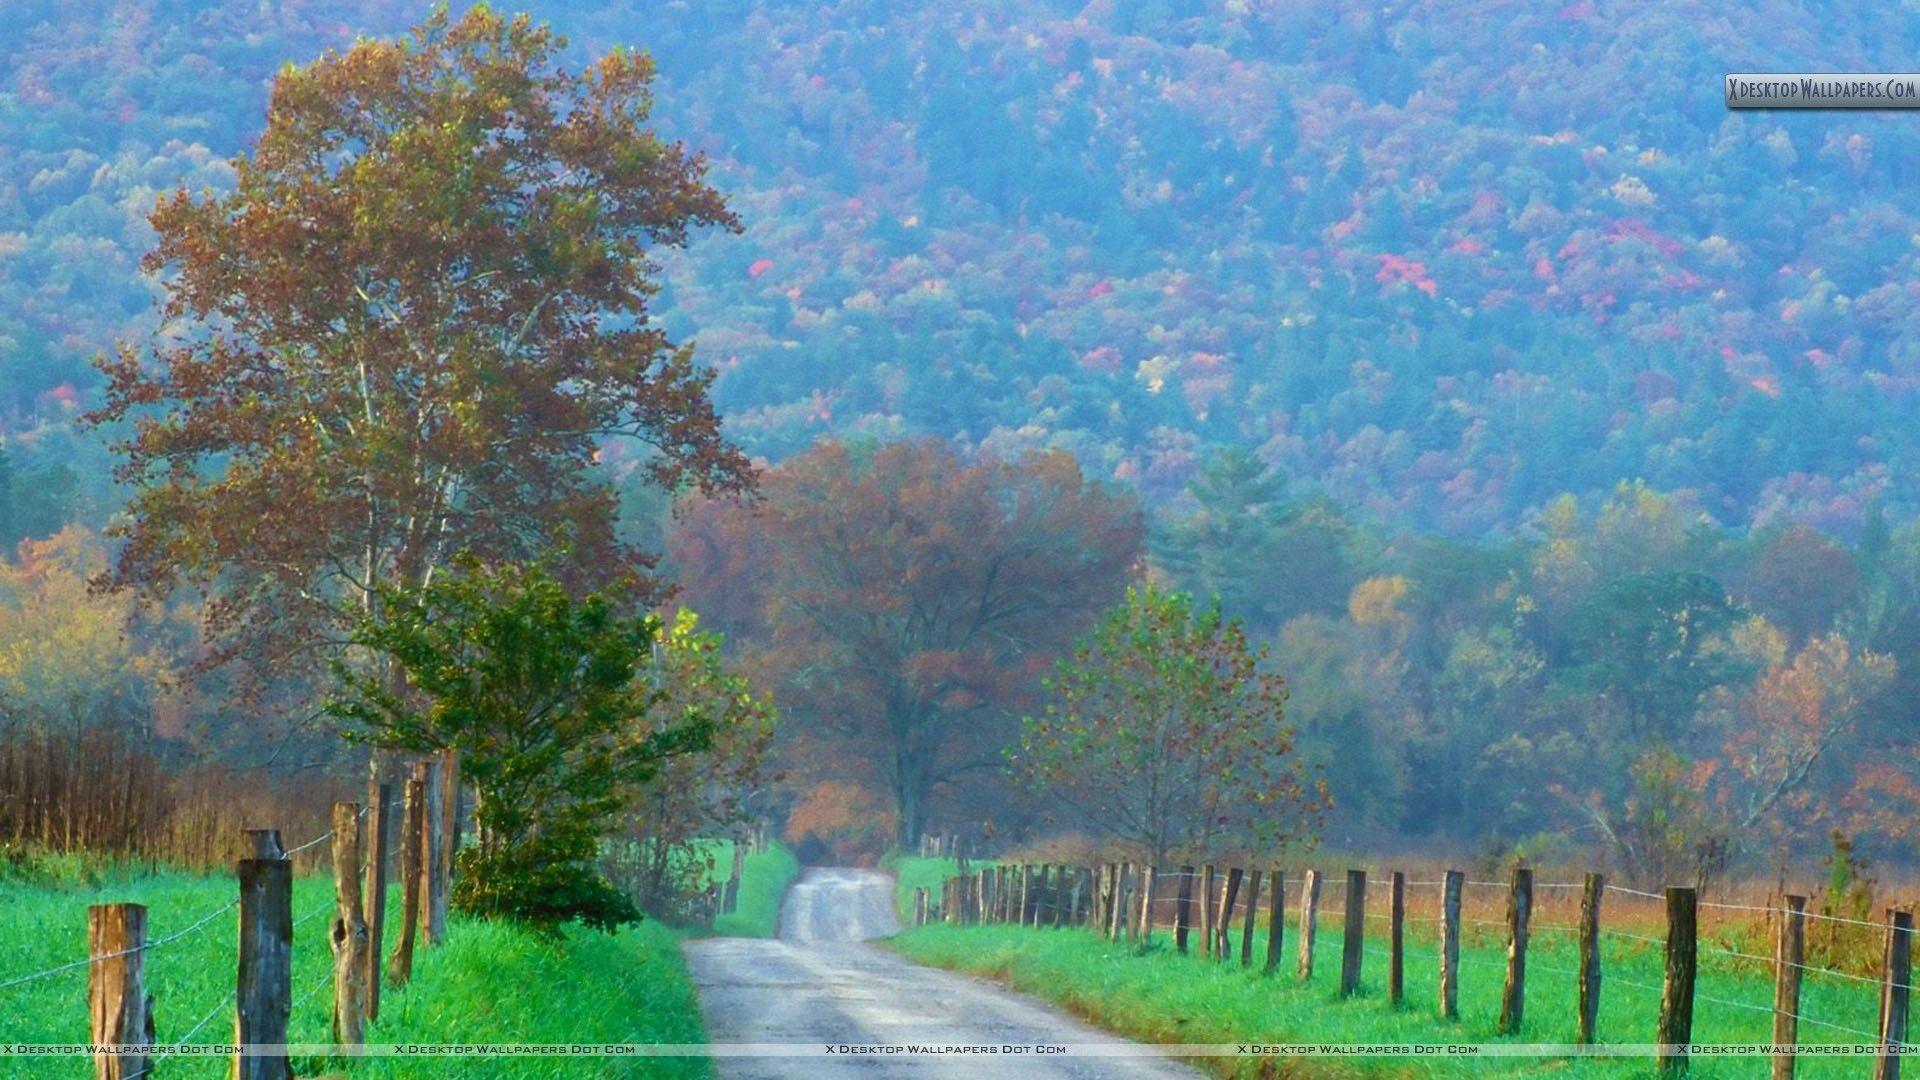 Cades Cove Great Smoky Mountains National Park Tennessee Wallpaper